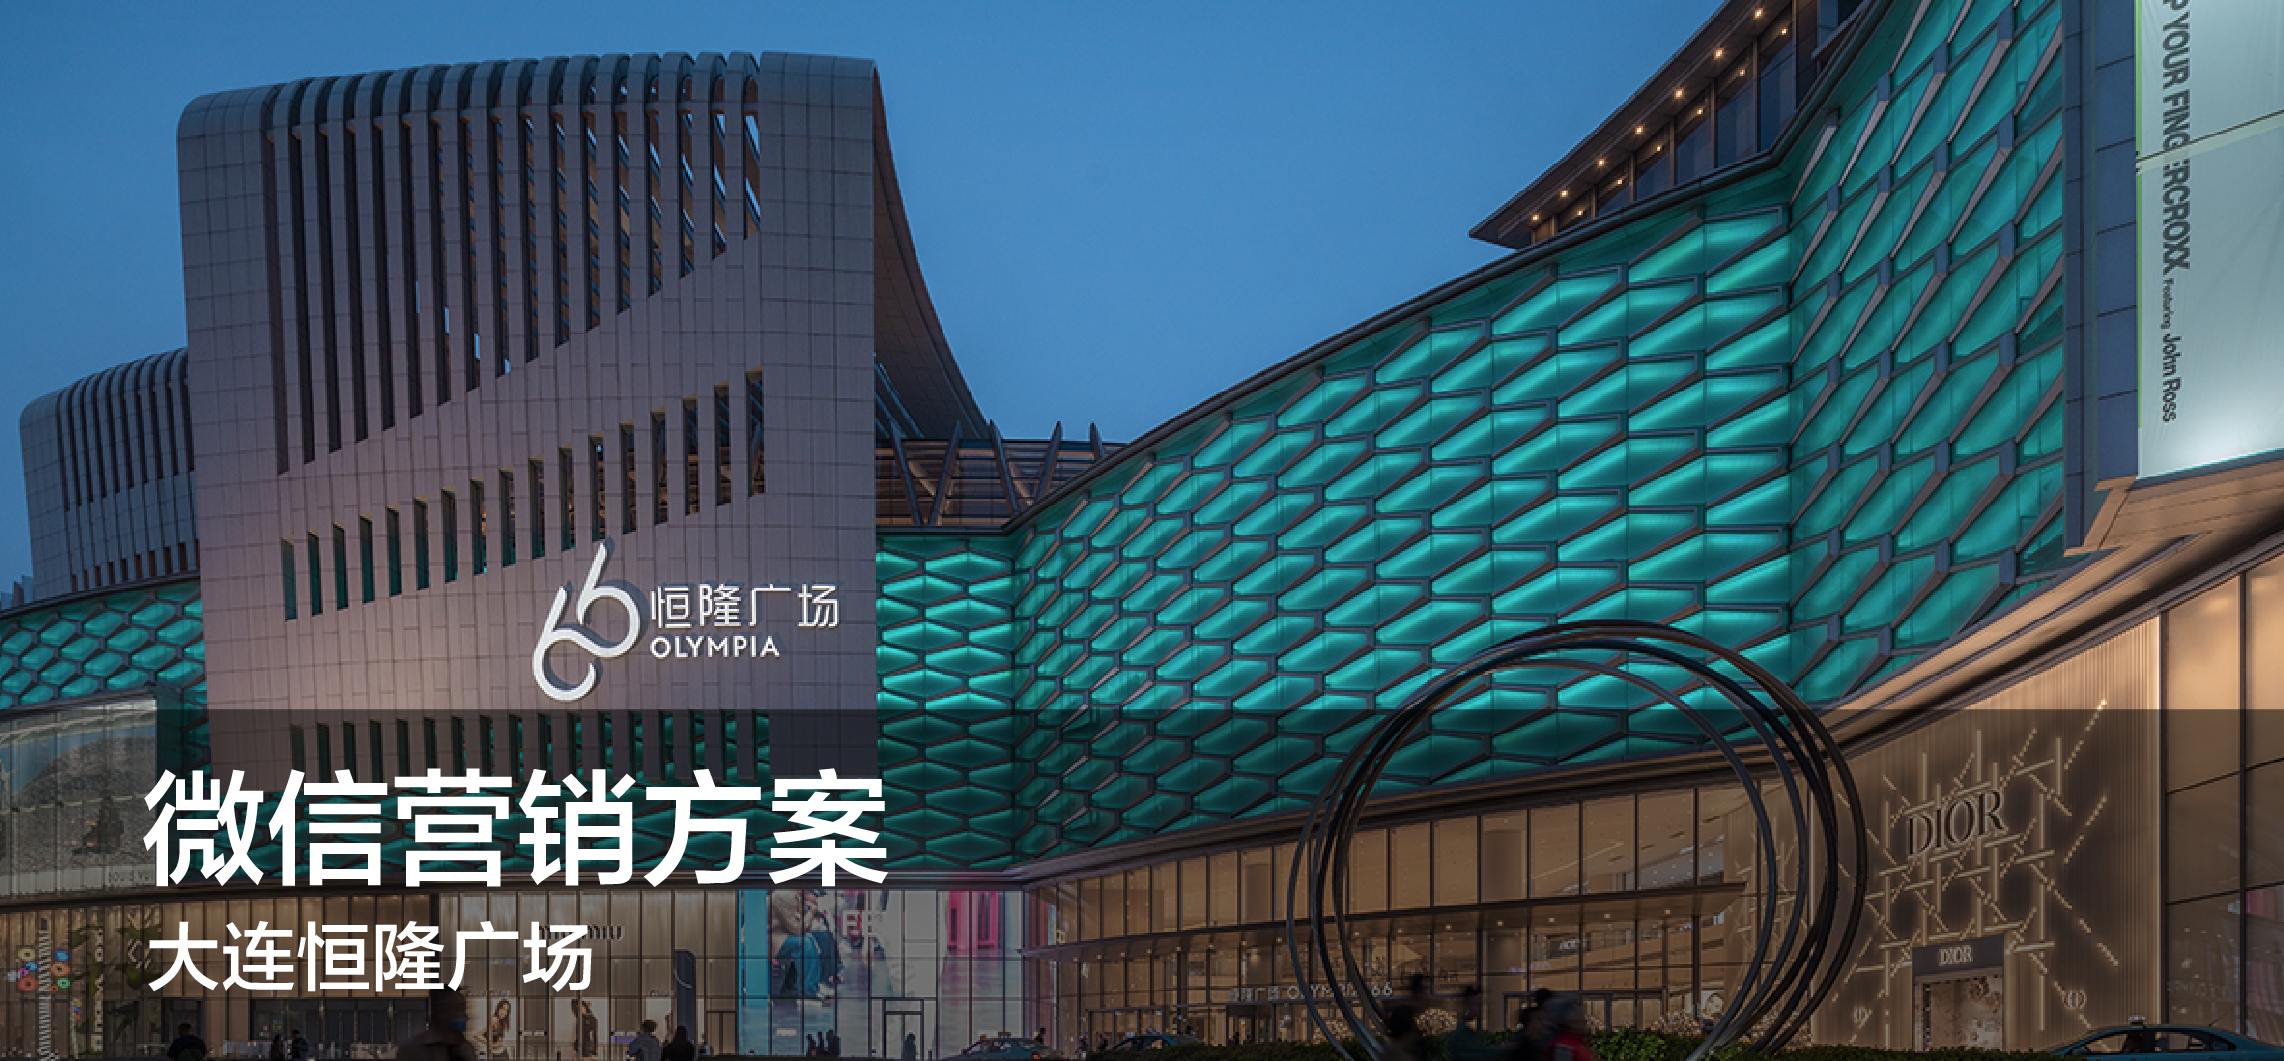 WeChat Solution - OLYMPIA 66 - Shopping Mall - INITSOC